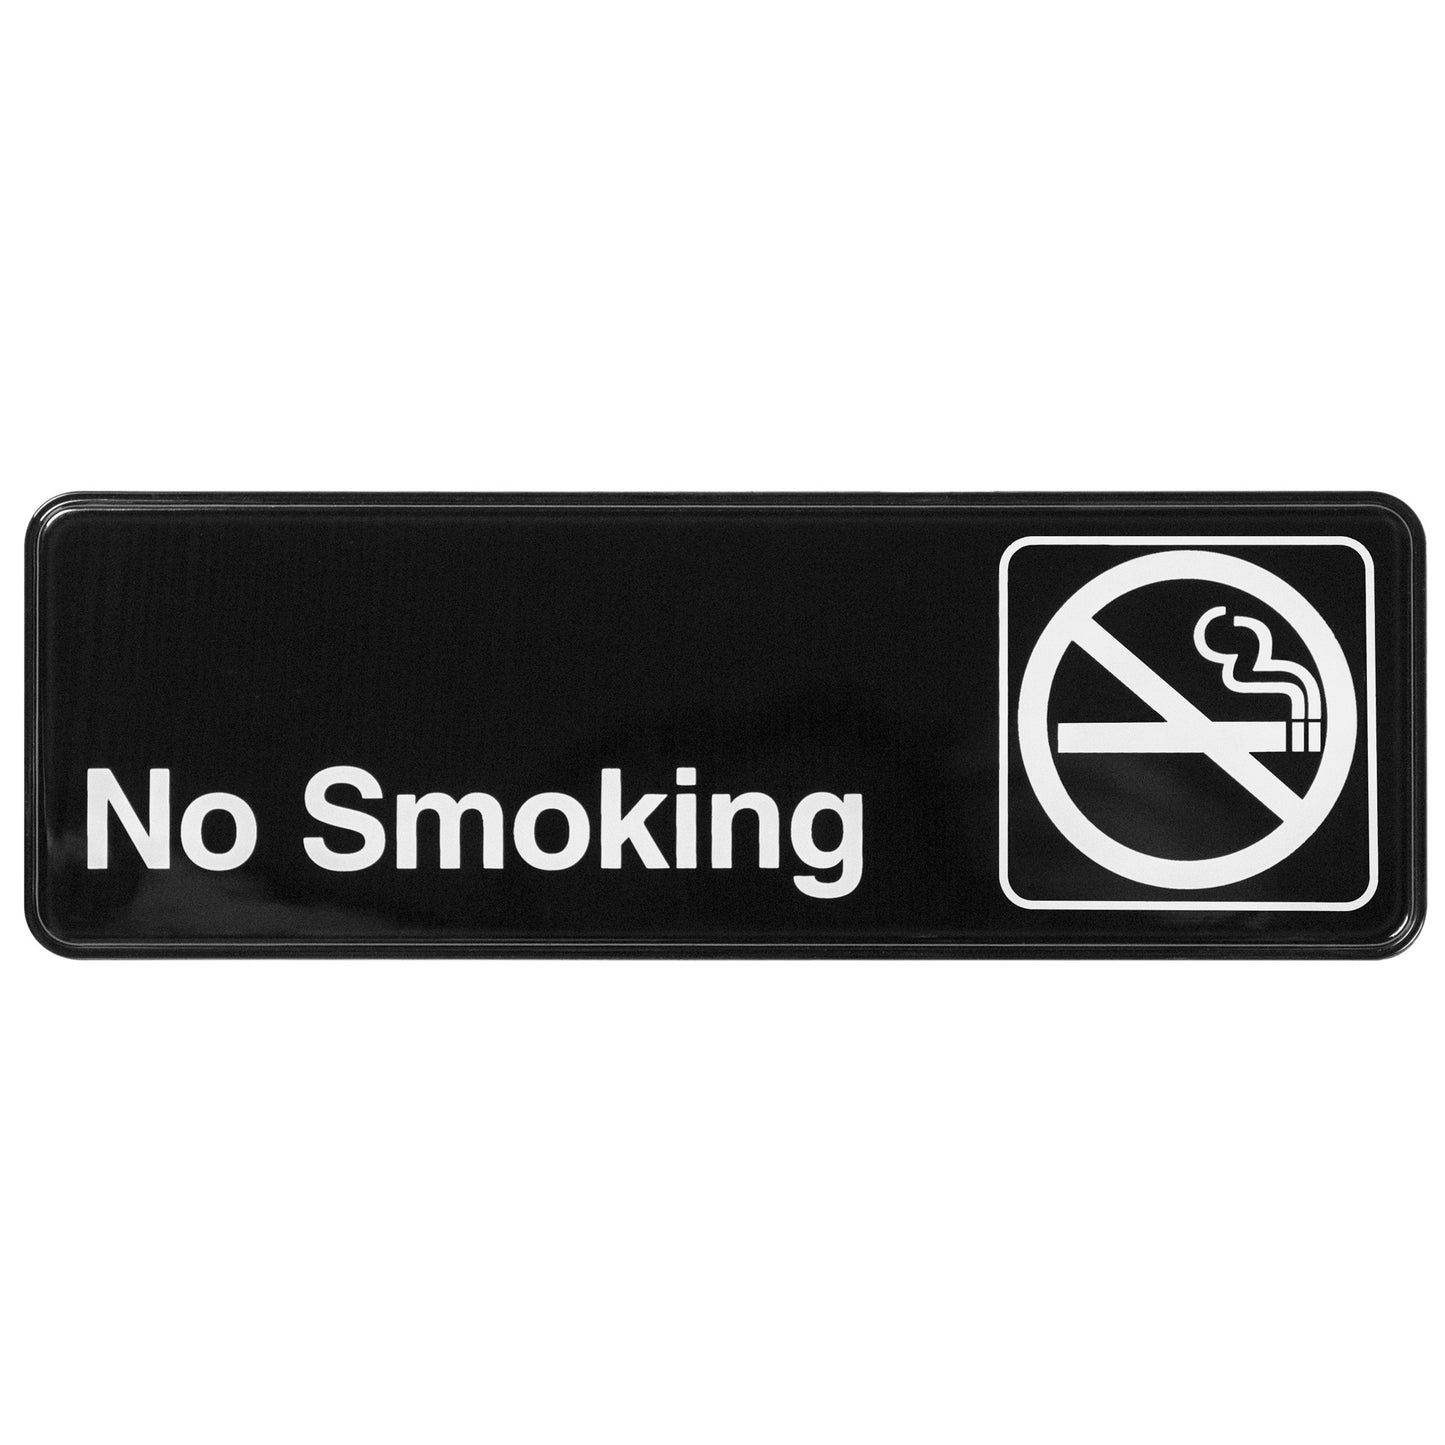 SGN-310 - Information Signs, 9"W x 3"H - SGN-310 - No Smoking